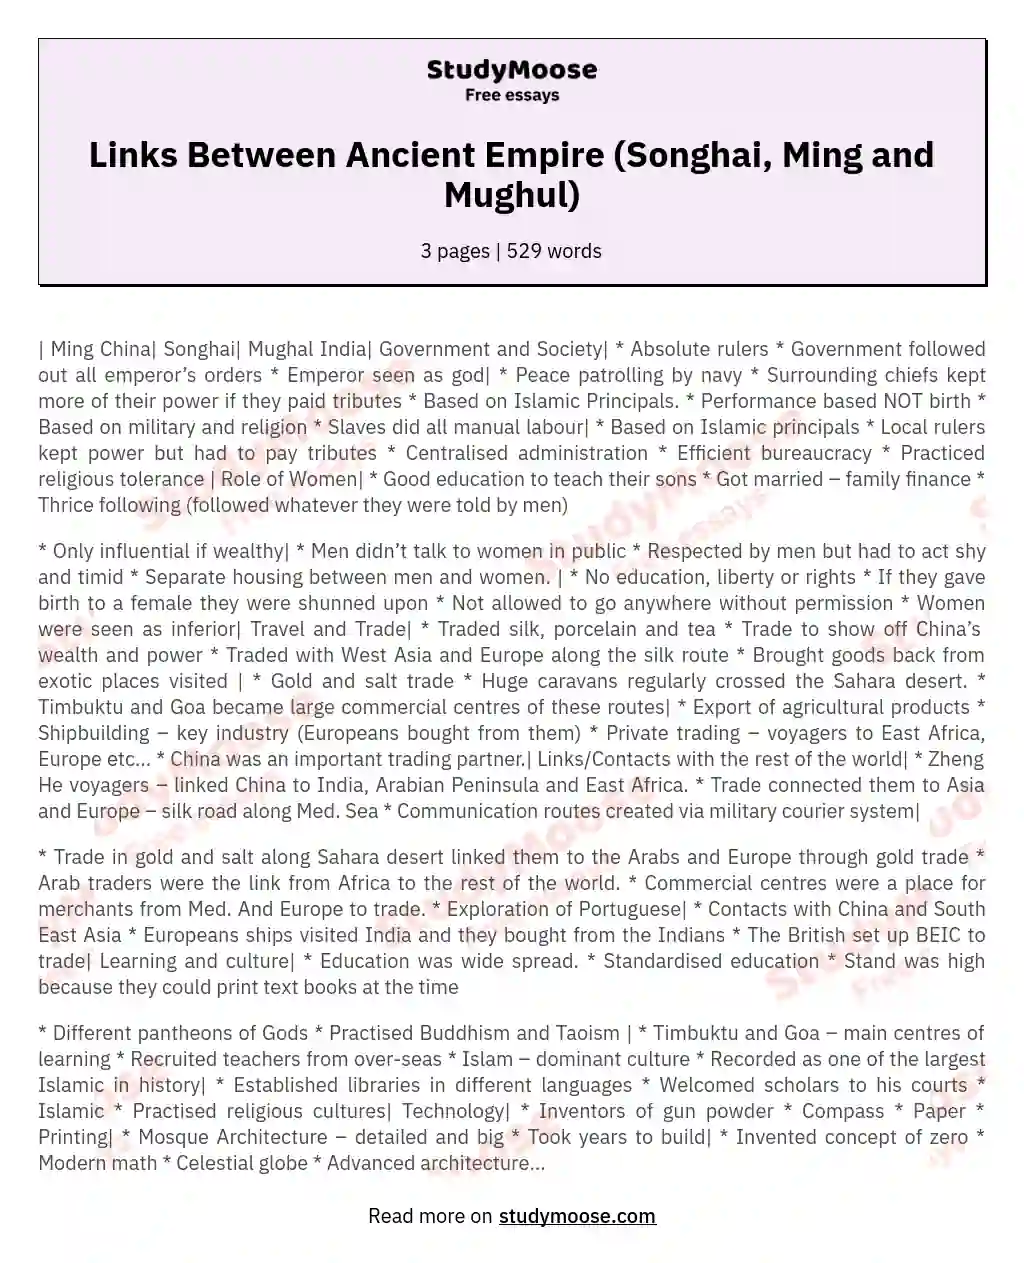 Links Between Ancient Empire (Songhai, Ming and Mughul) essay